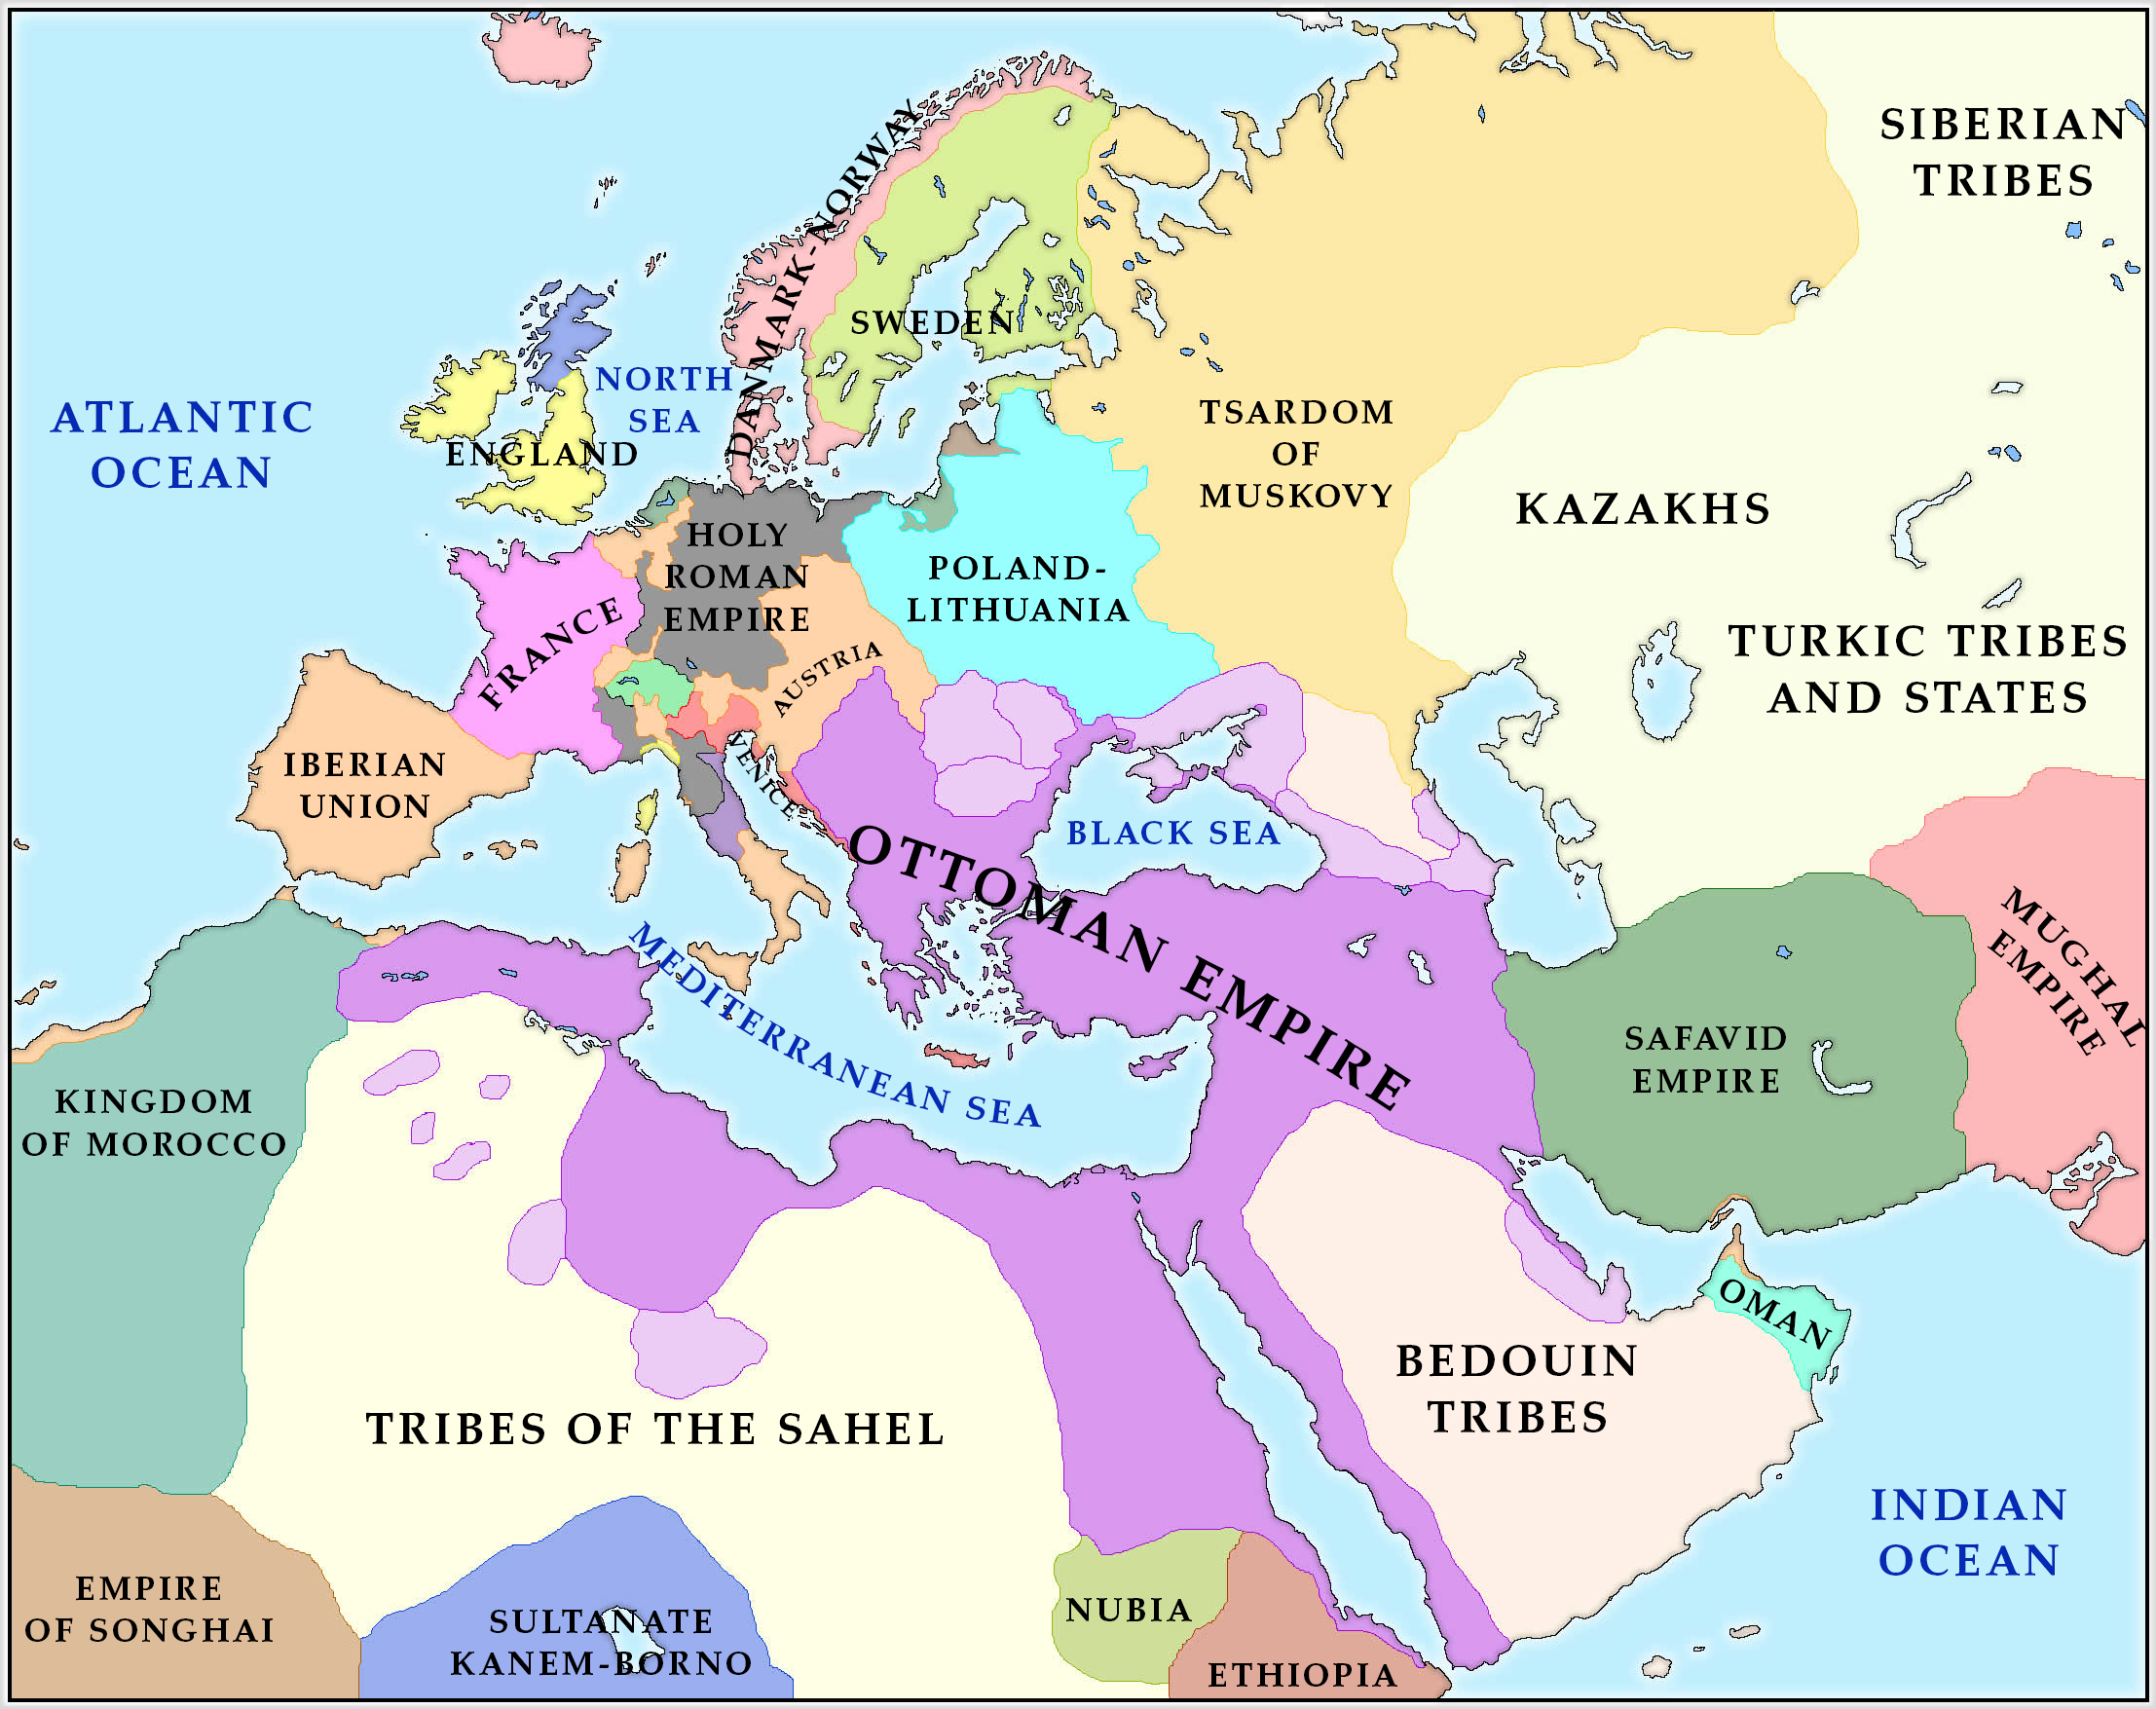 Alexander Stoyanov on X: The Old World and the Ottoman empire